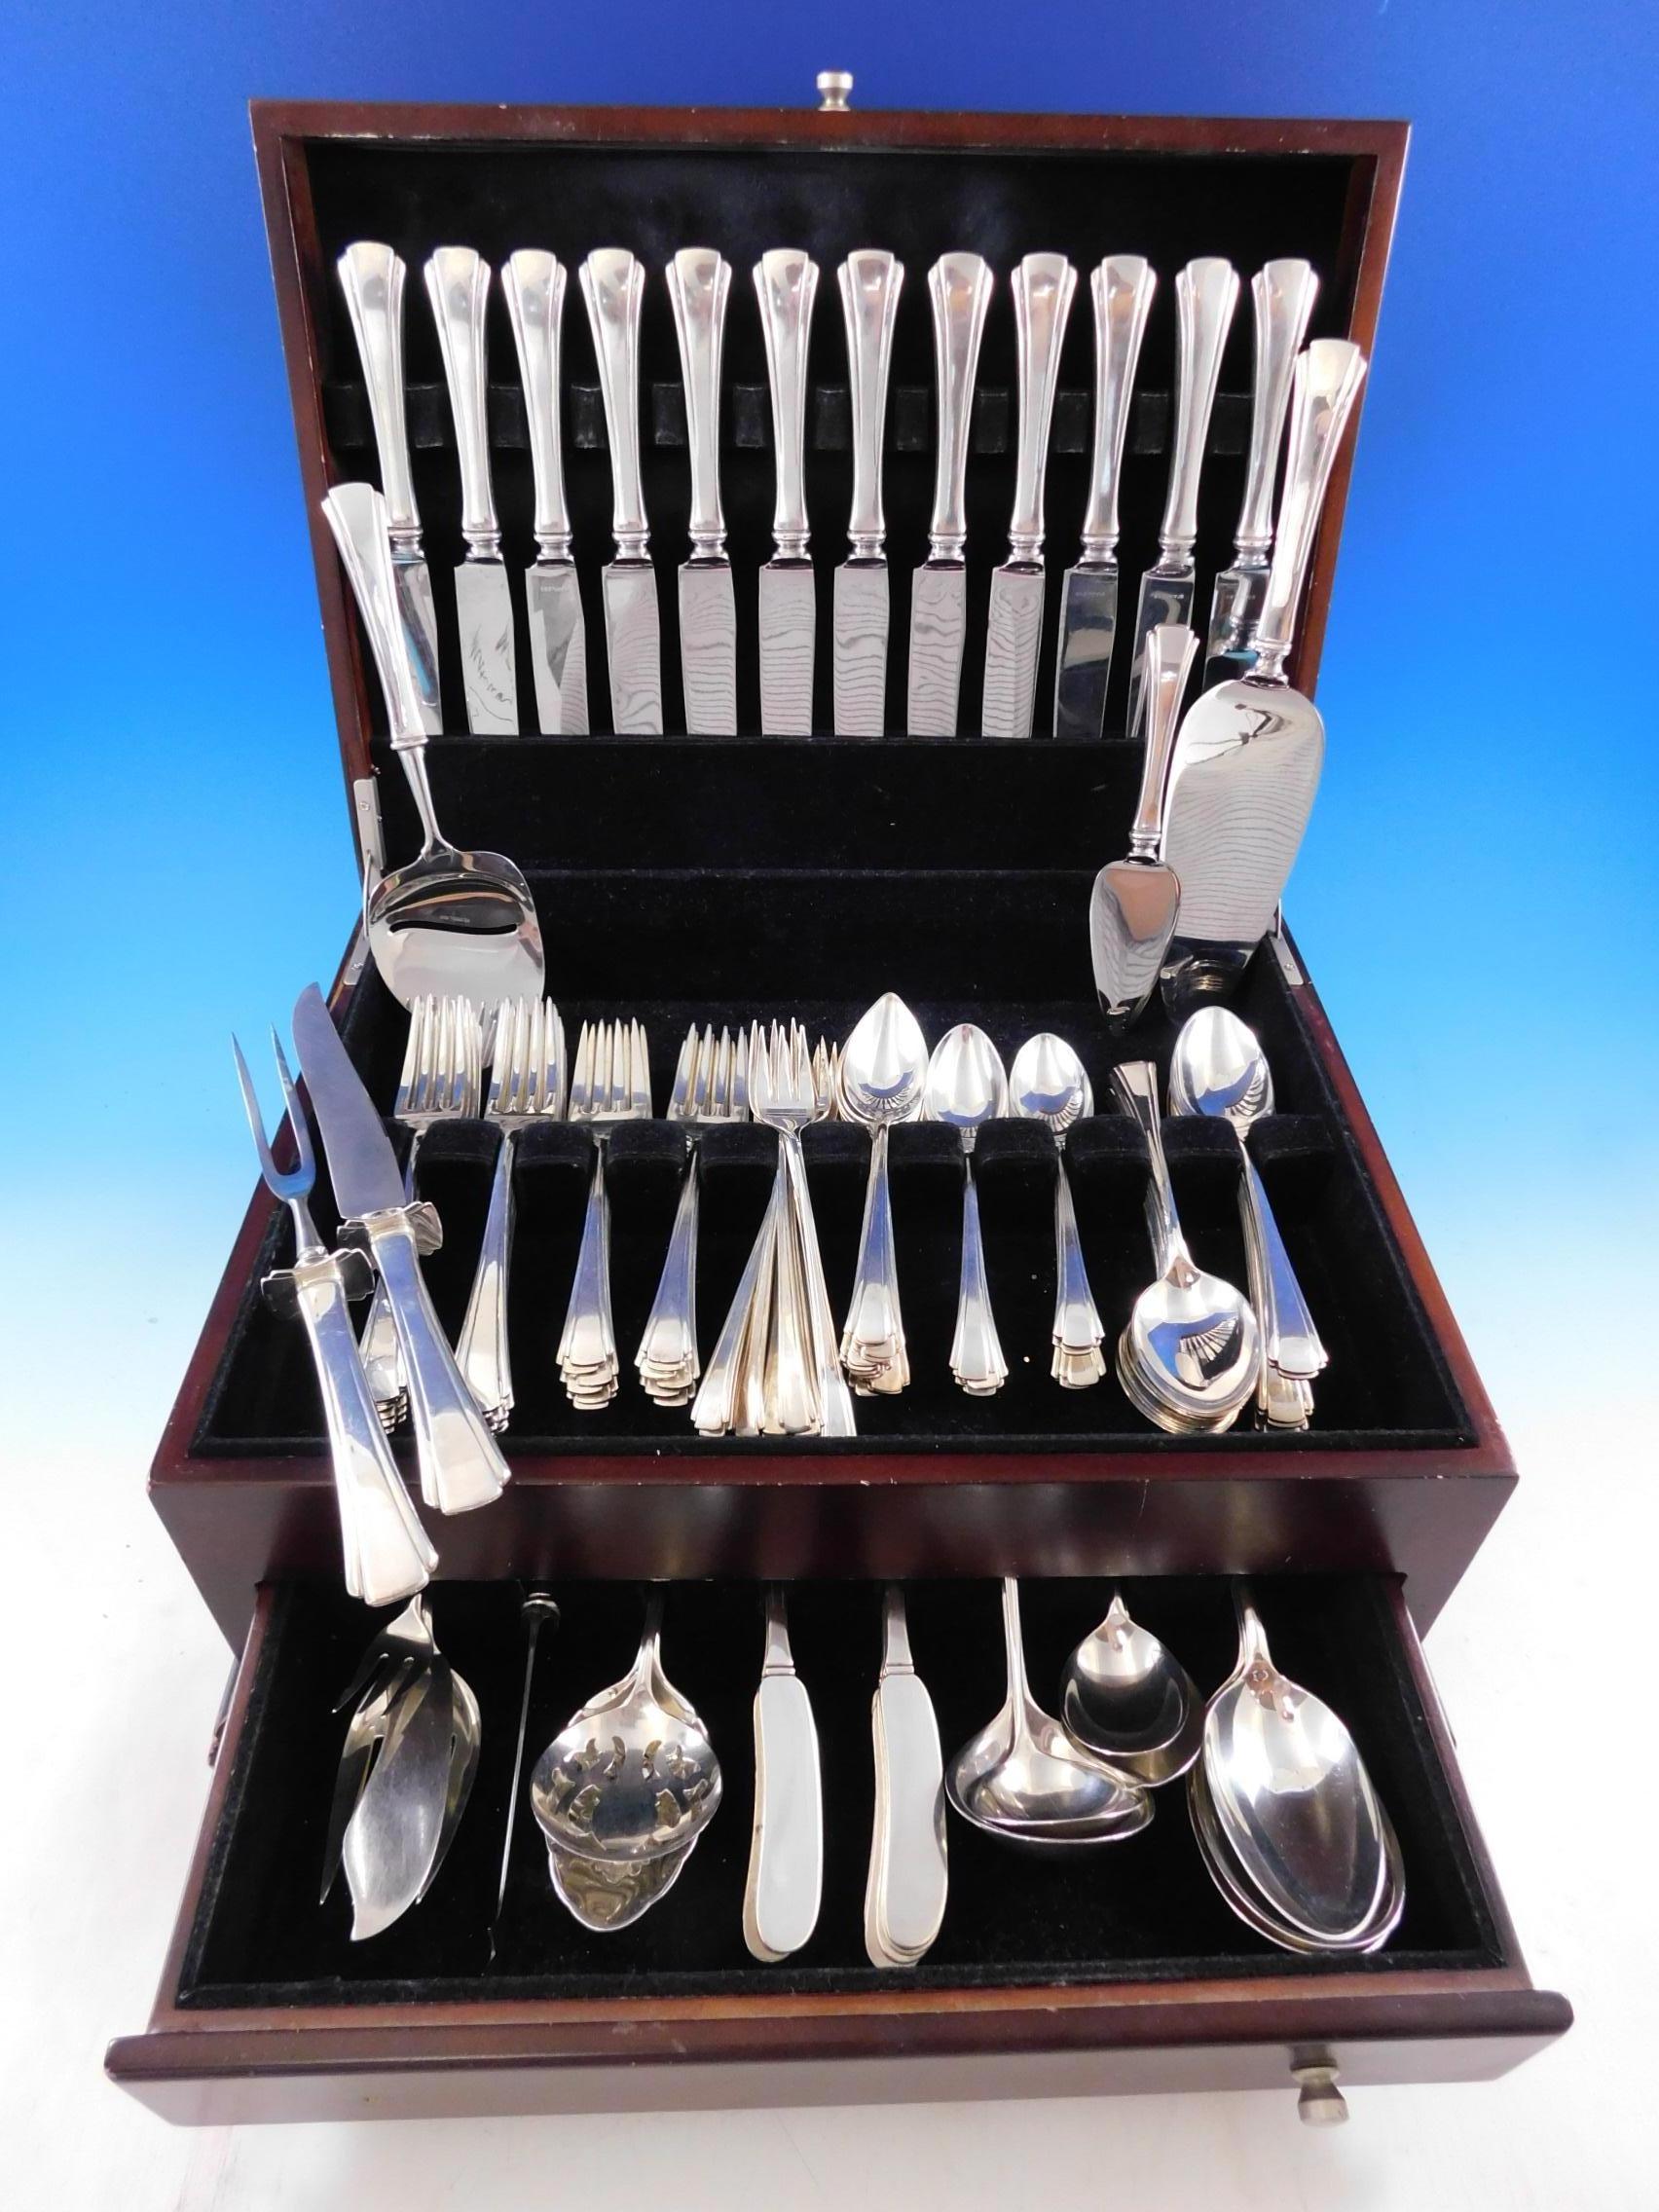 Richard Dimes was established in South Boston, MA and was a purveyor of fine sterling silver. It was founded in the year 1923 and lasted till 1955. Its founder, Richard Dimes started Towle's hollowware line around 1890. Richard Dimes Co.